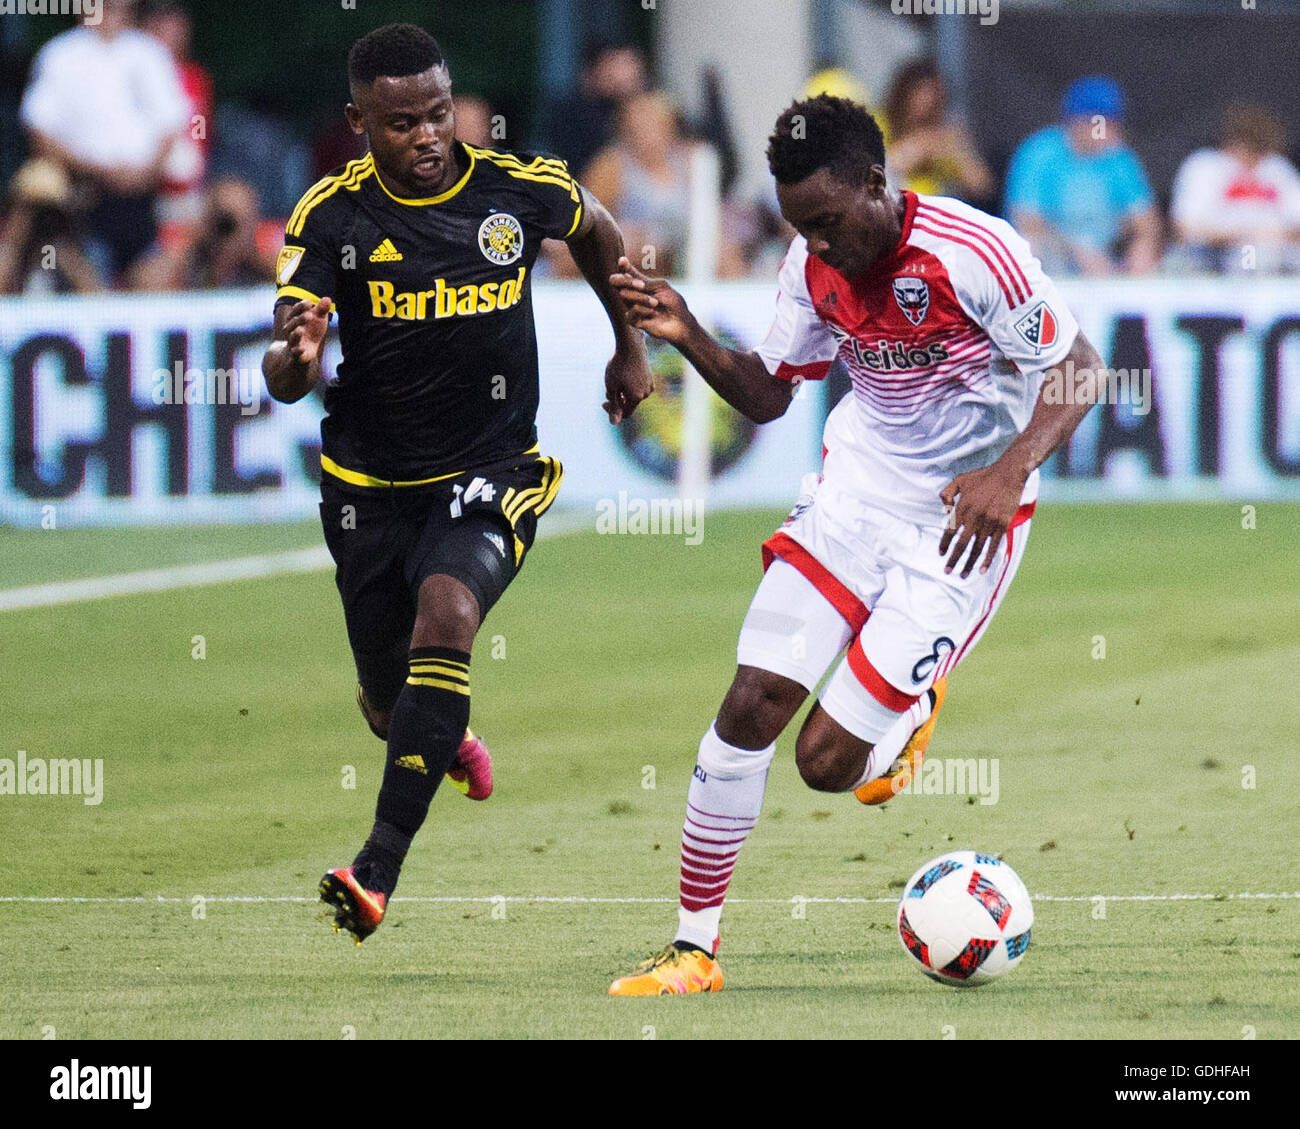 Columbus, U.S.A. 16th July, 2016. July 16, 2016: D.C. United midfielder Lloyd Sam (8) fights for the ball in the match against Columbus Crew SC defender Waylon Francis (14). Columbus, Ohio, USA. (Brent Clark/Alamy Live News) Stock Photo